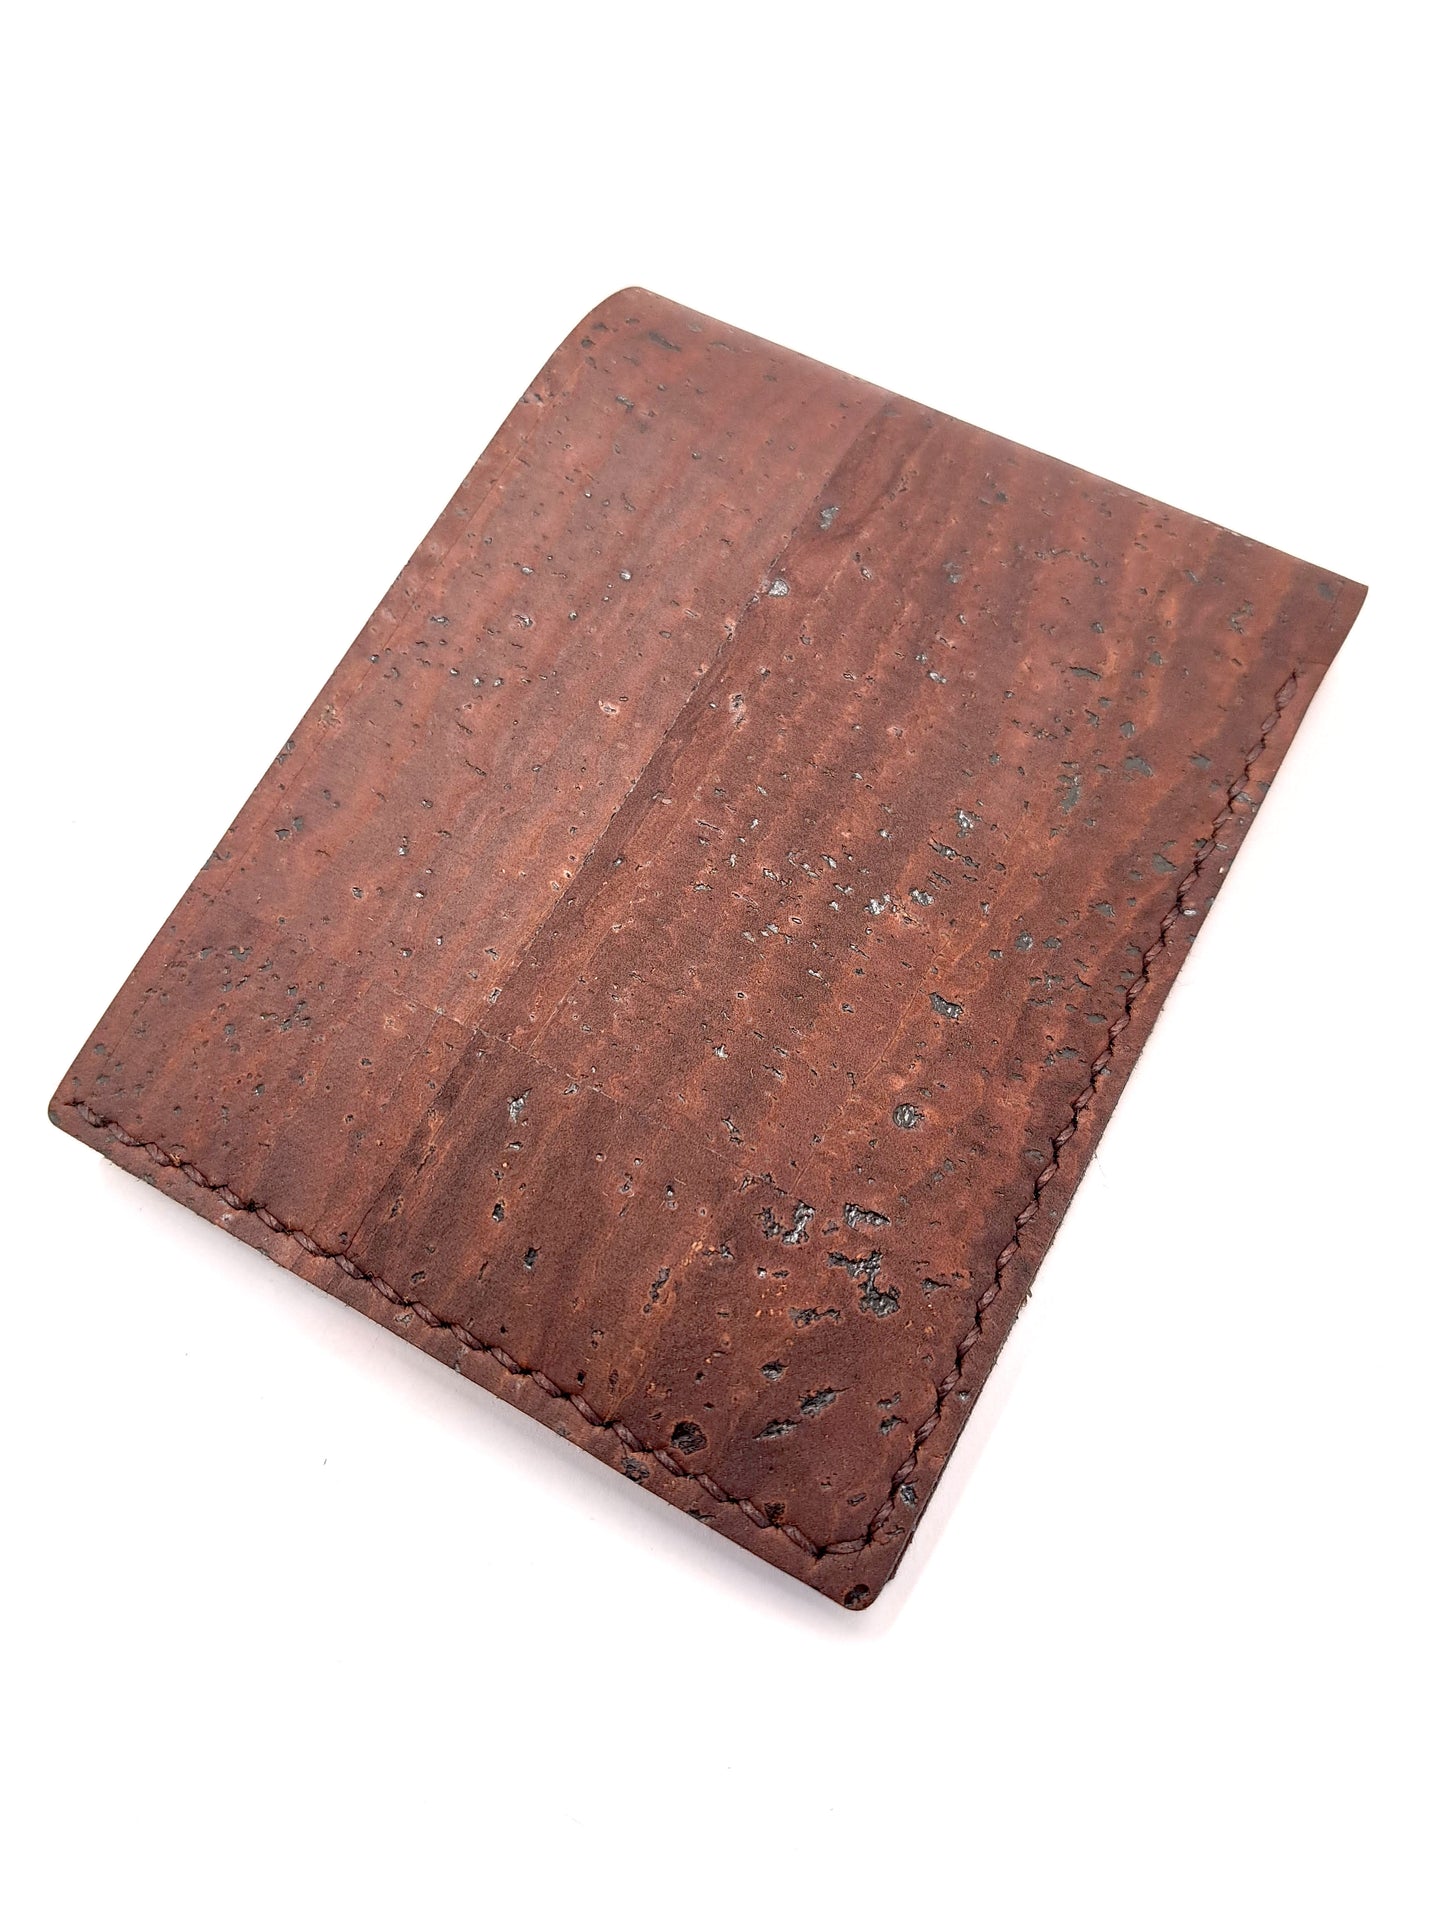 Bifold Cork Leather Wallet with RFID protection